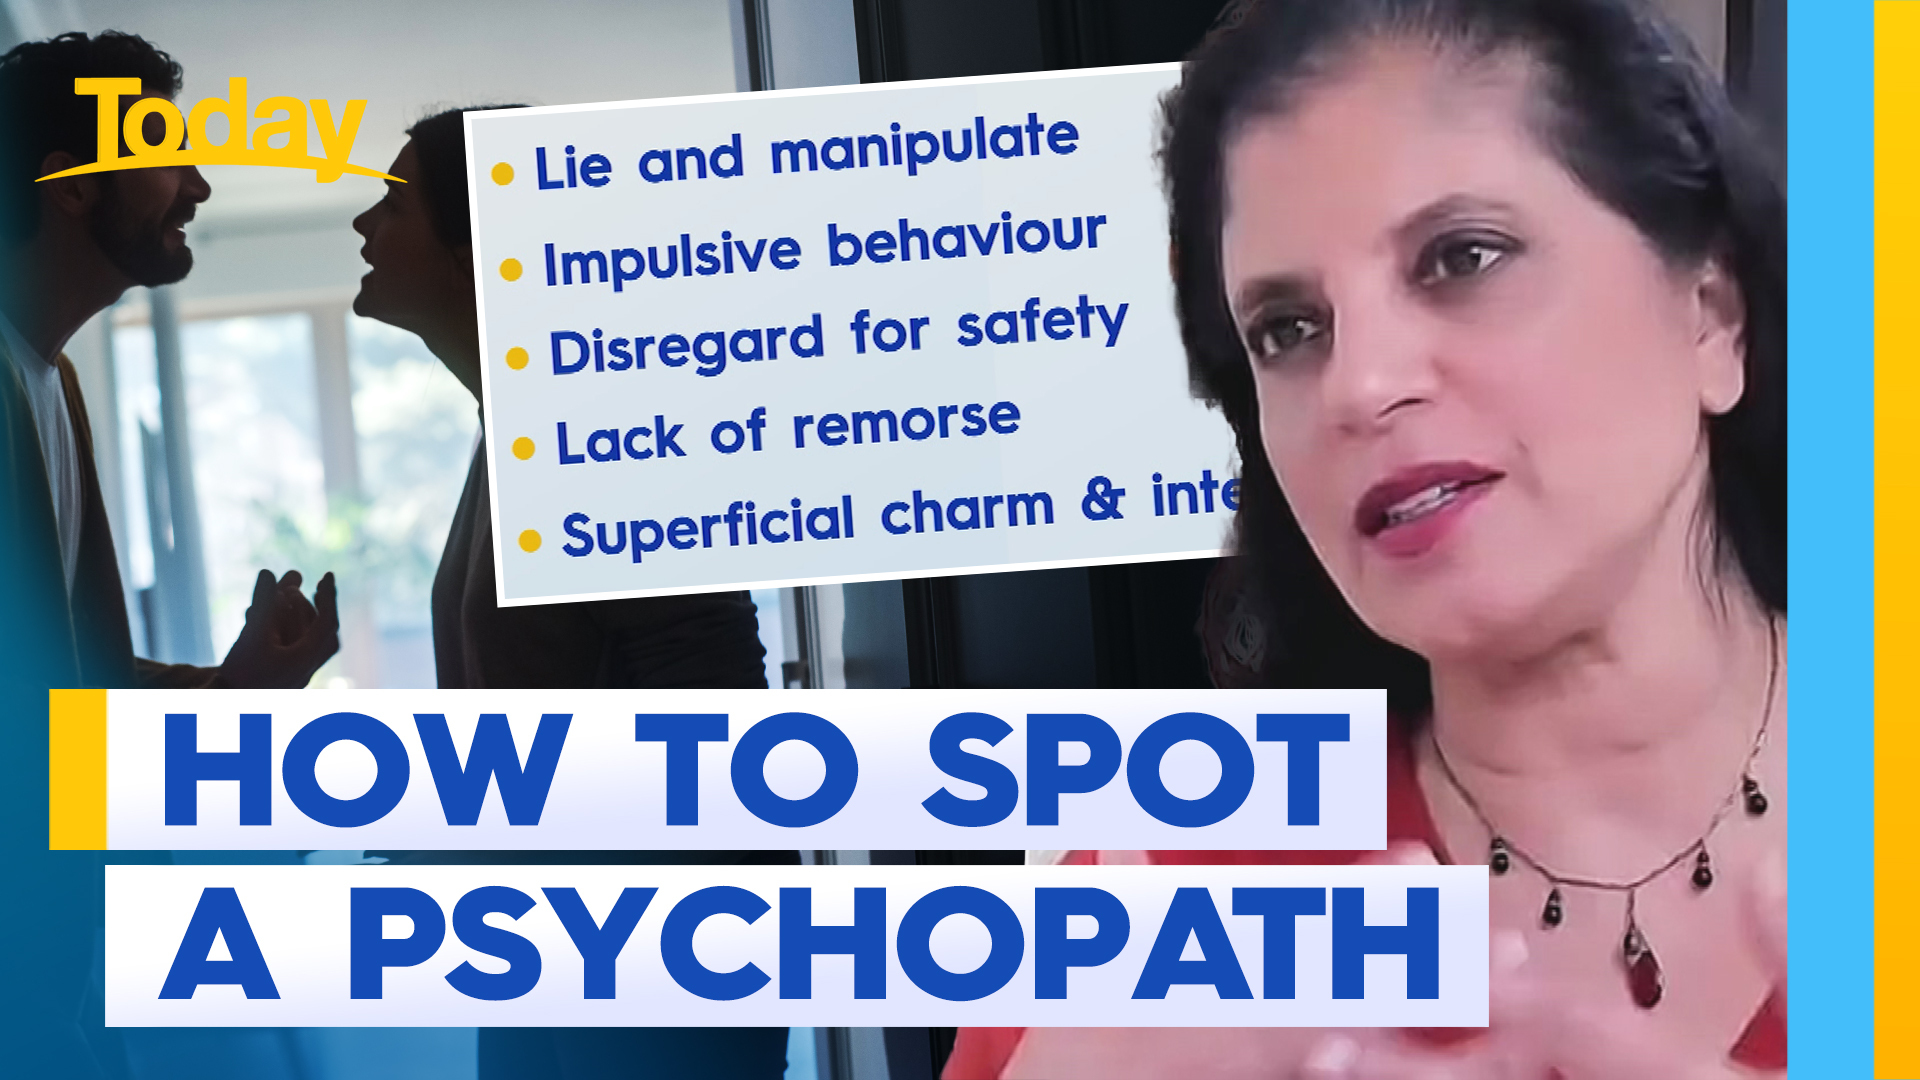 How to spot a psychopath